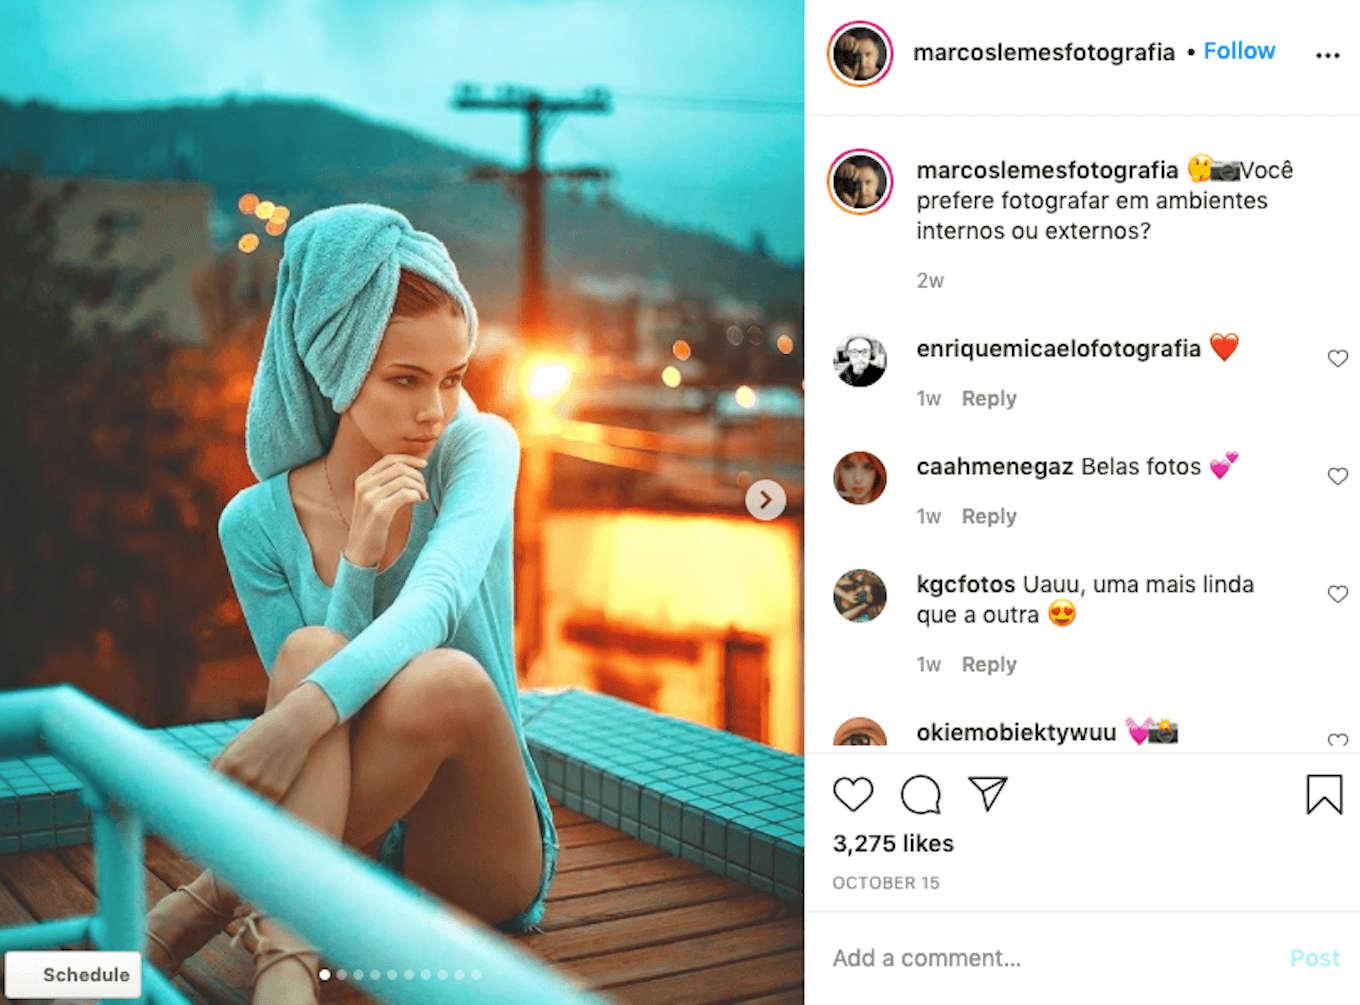 An Instagram photo featuring a woman sitting on a rooftop with the sun shining behind her.